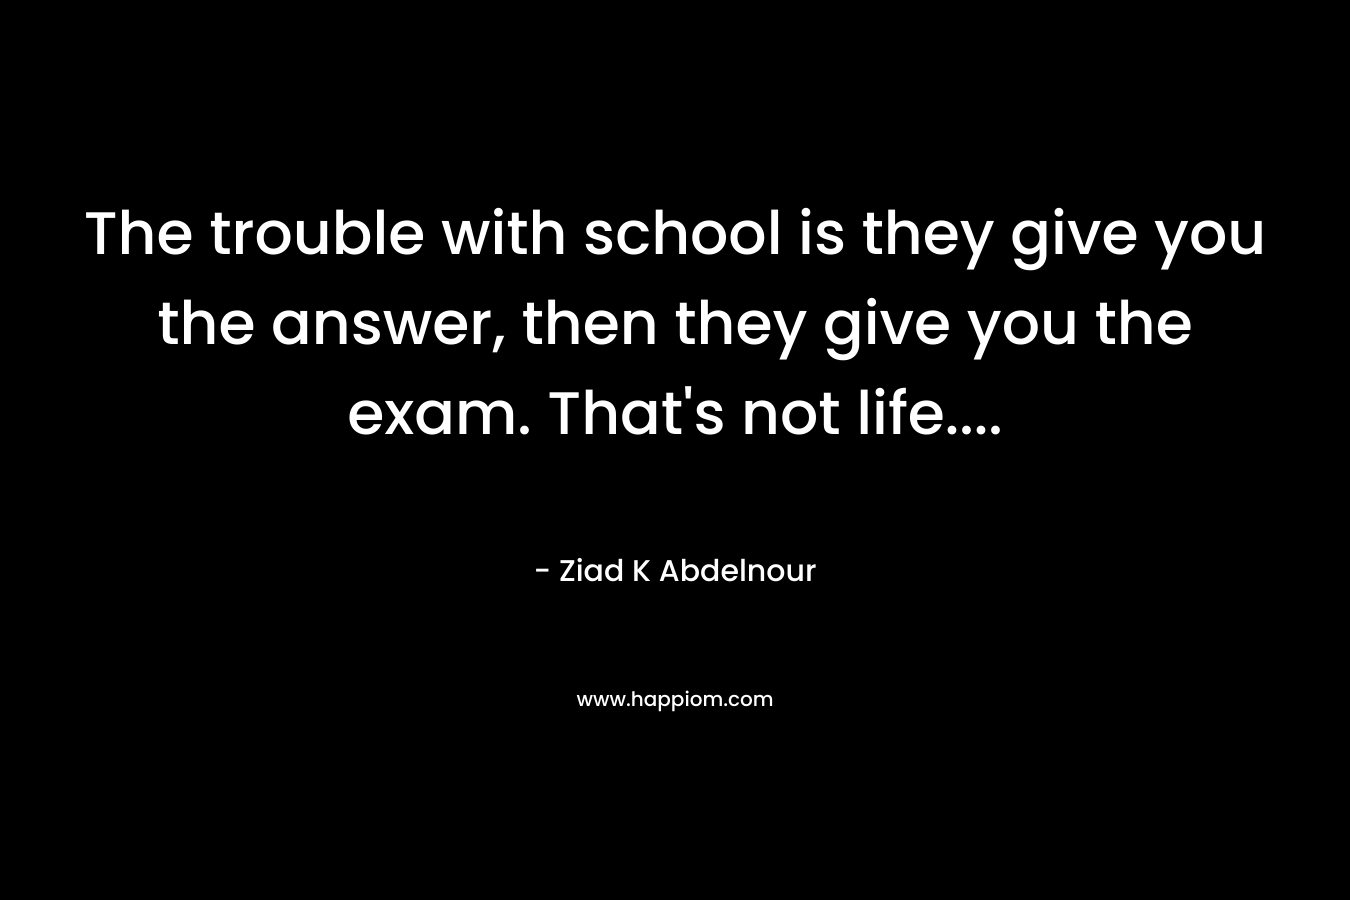 The trouble with school is they give you the answer, then they give you the exam. That’s not life…. – Ziad K Abdelnour